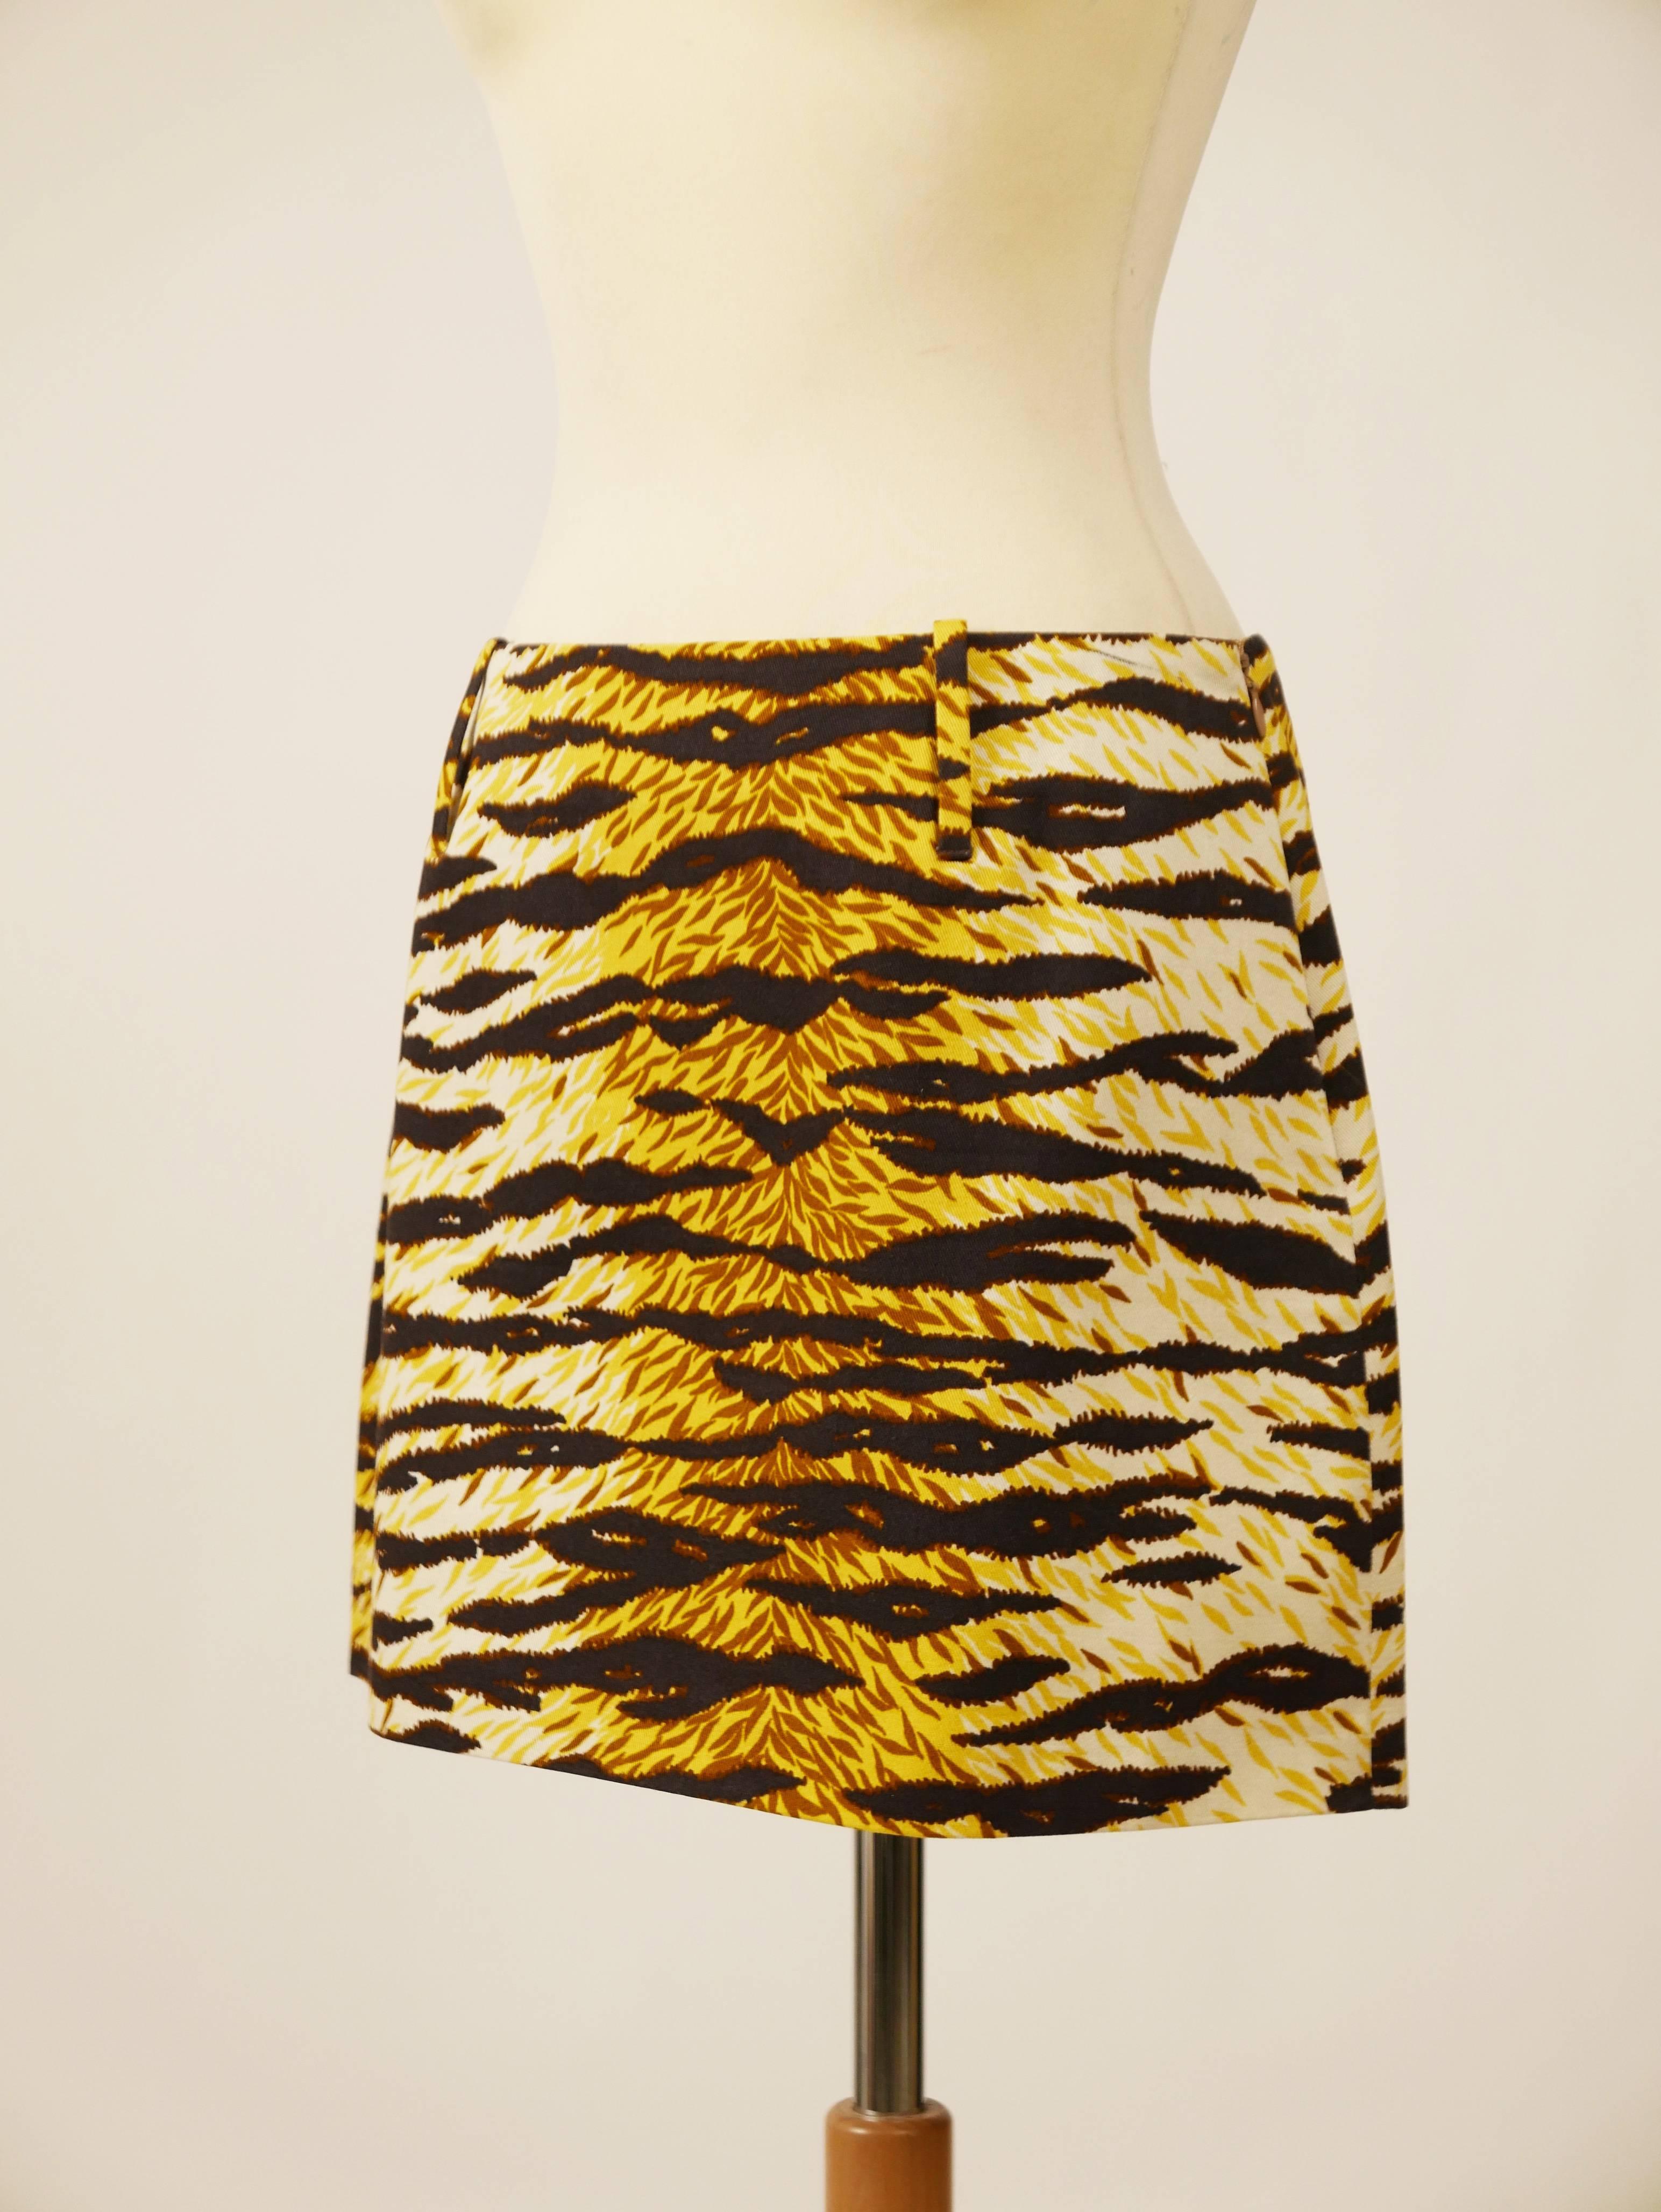 This lovely D&G 1990s mini skirt is in a tiger animal print cotton fabric. It has side zip closure and belt loops. 

Good condition (It has black marker signs but that blend with the fabric print, see photos)

Label: D&G - Made in